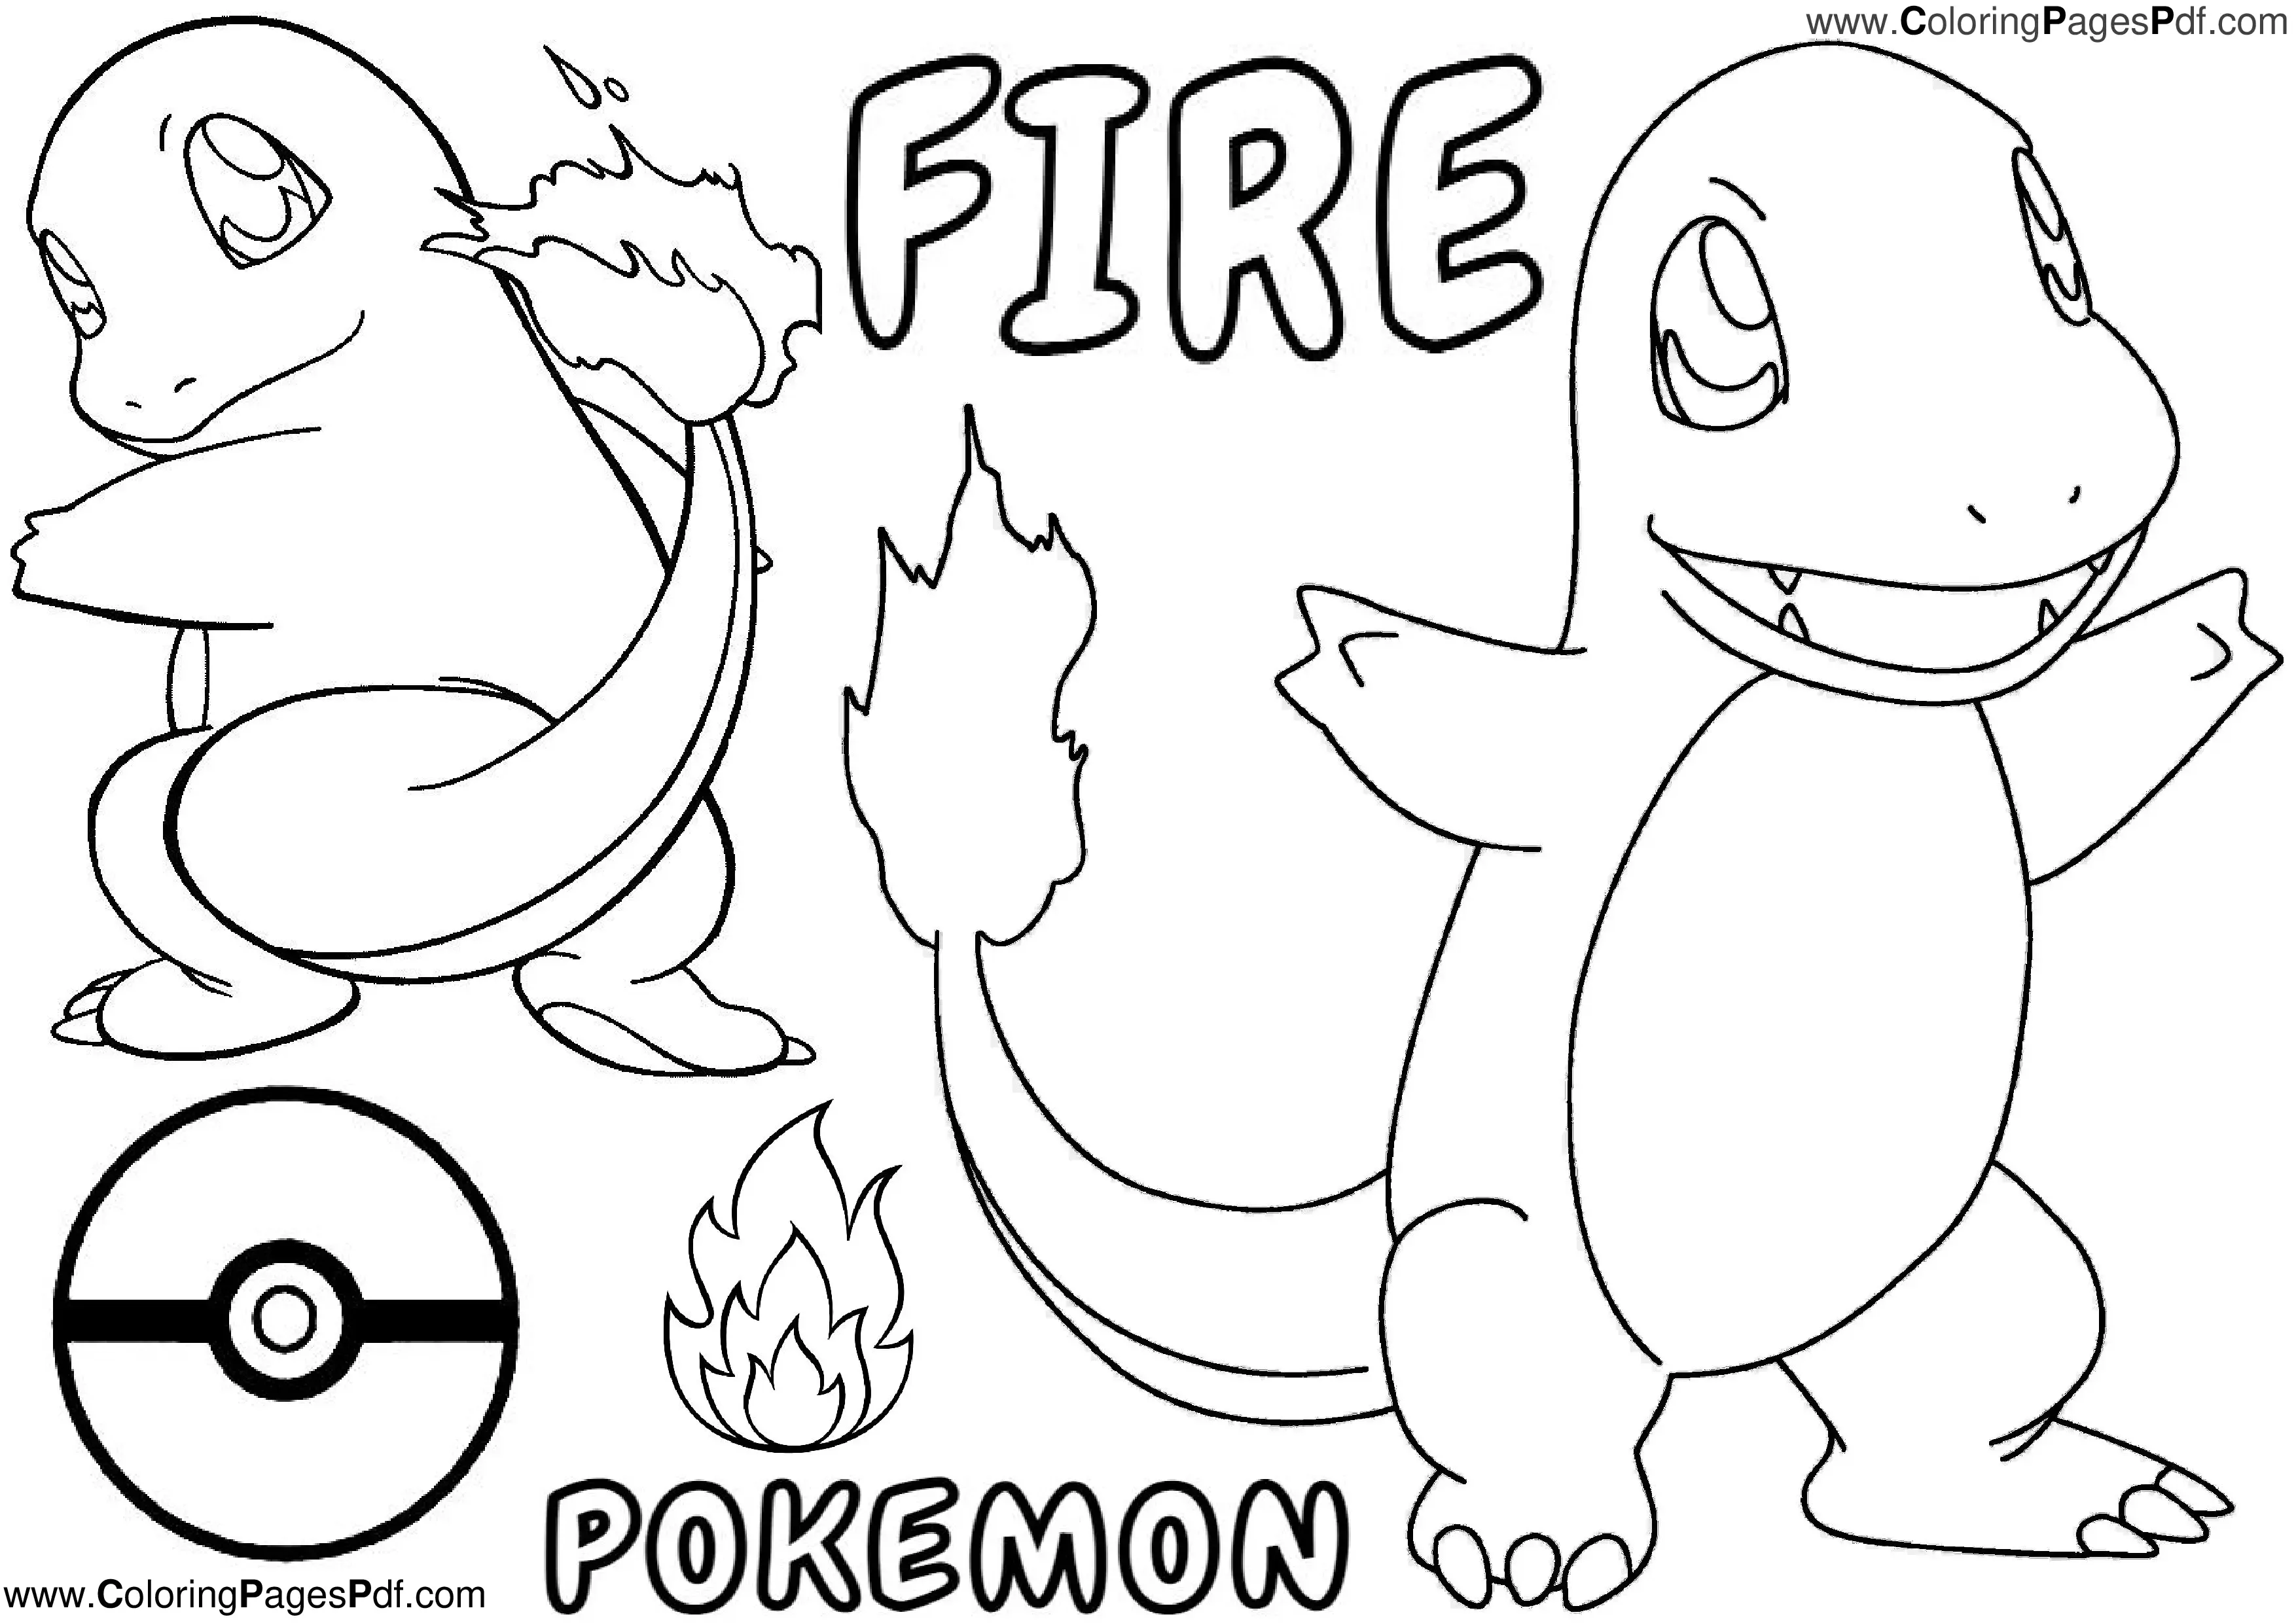 Fire Pokemon coloring pages